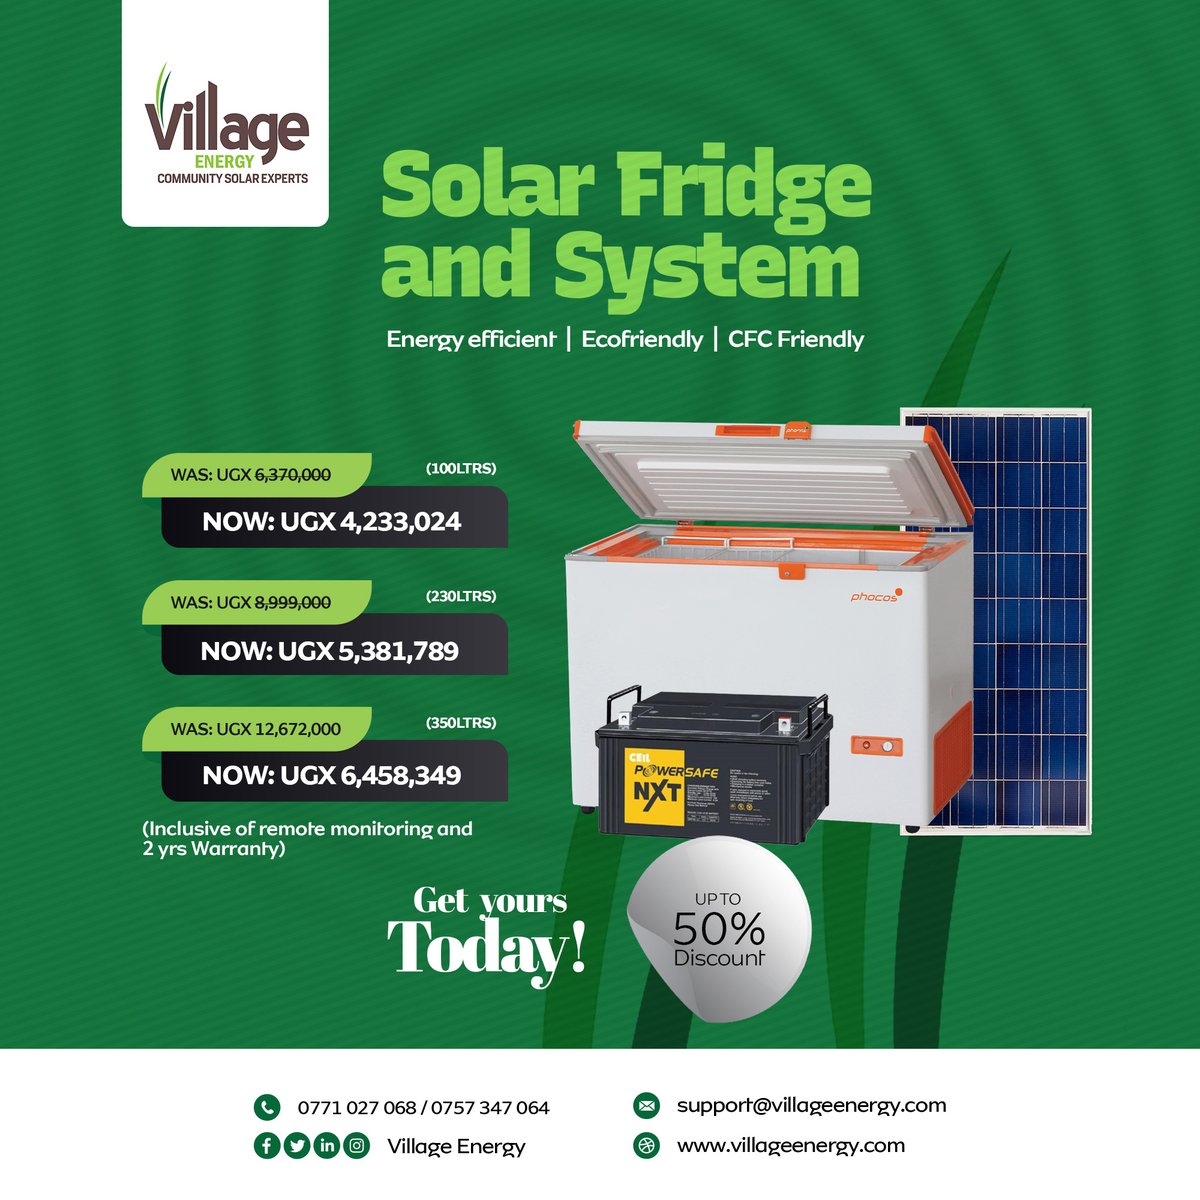 Get in touch today to enjoy upto 50% discount on @phocossolar fridges.
Available in 100, 230 &350 Litres
 Financing is available from @UgEquityBank

📱 +256 771027068/ 757347064   
#solarenergy
 #SolarFridges 
#SolarinUganda 
#SolarSolutions 
#SolarLoans 
#CommunitySolarExperts